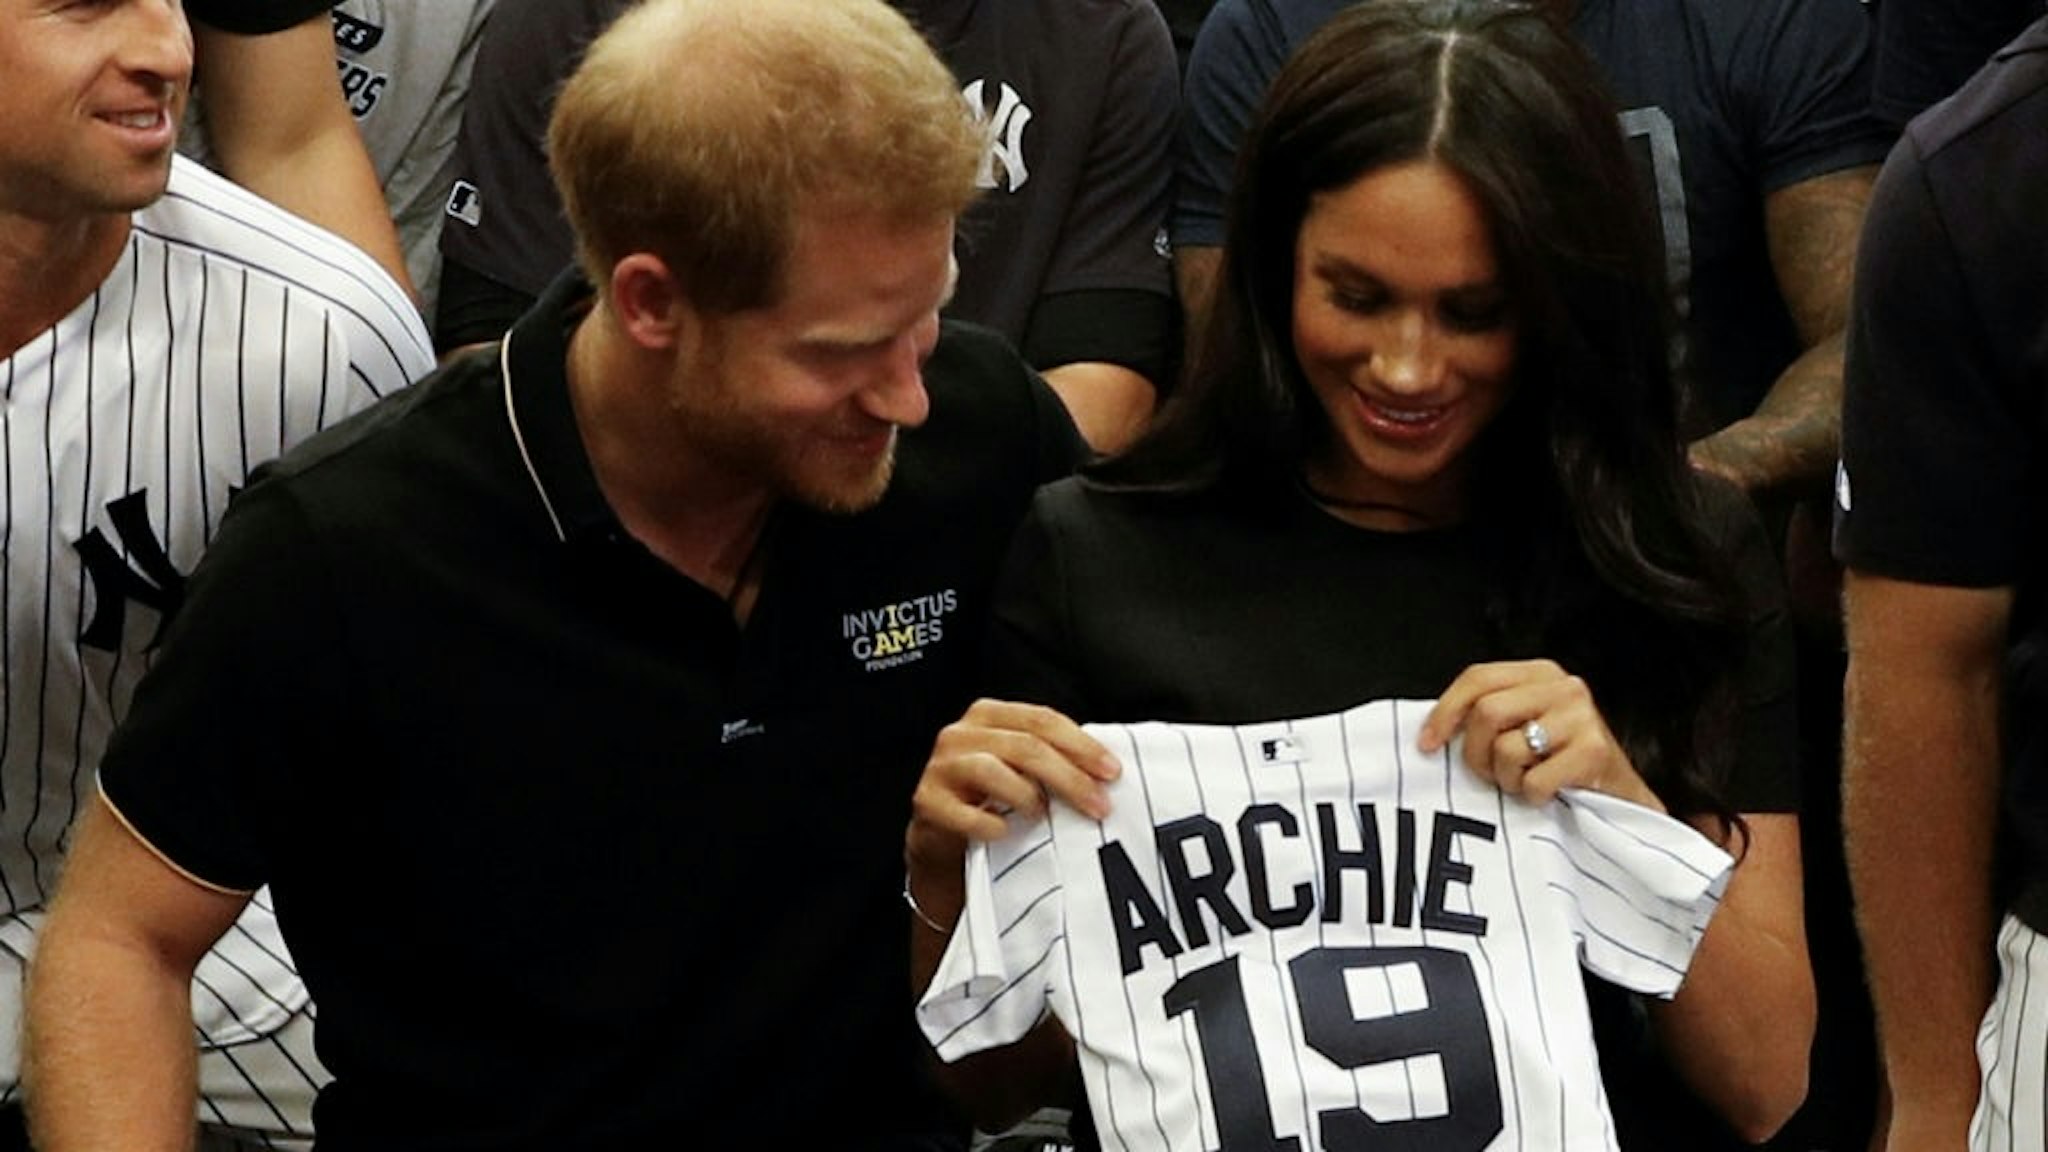 Britain's Prince Harry, Duke of Sussex, and his wife Meghan, Duchess of Sussex react as they are presented with gifts for her newborn son Archie, as they meet New York Yankees players ahead of their match against the Boston Red Sox at the London Stadium in Queen Elizabeth Olympic Park, east London on June 29, 2019, for the first of a two-game Baseball series in London. - As Major League Baseball prepares to make history in London, New York Yankees manager Aaron Boone and Boston Red Sox coach Alex Cora are united in their desire to make the ground-breaking trip memorable on and off the field. (Photo by PETER NICHOLLS / POOL / AFP) (Photo credit should read PETER NICHOLLS/AFP via Getty Images)